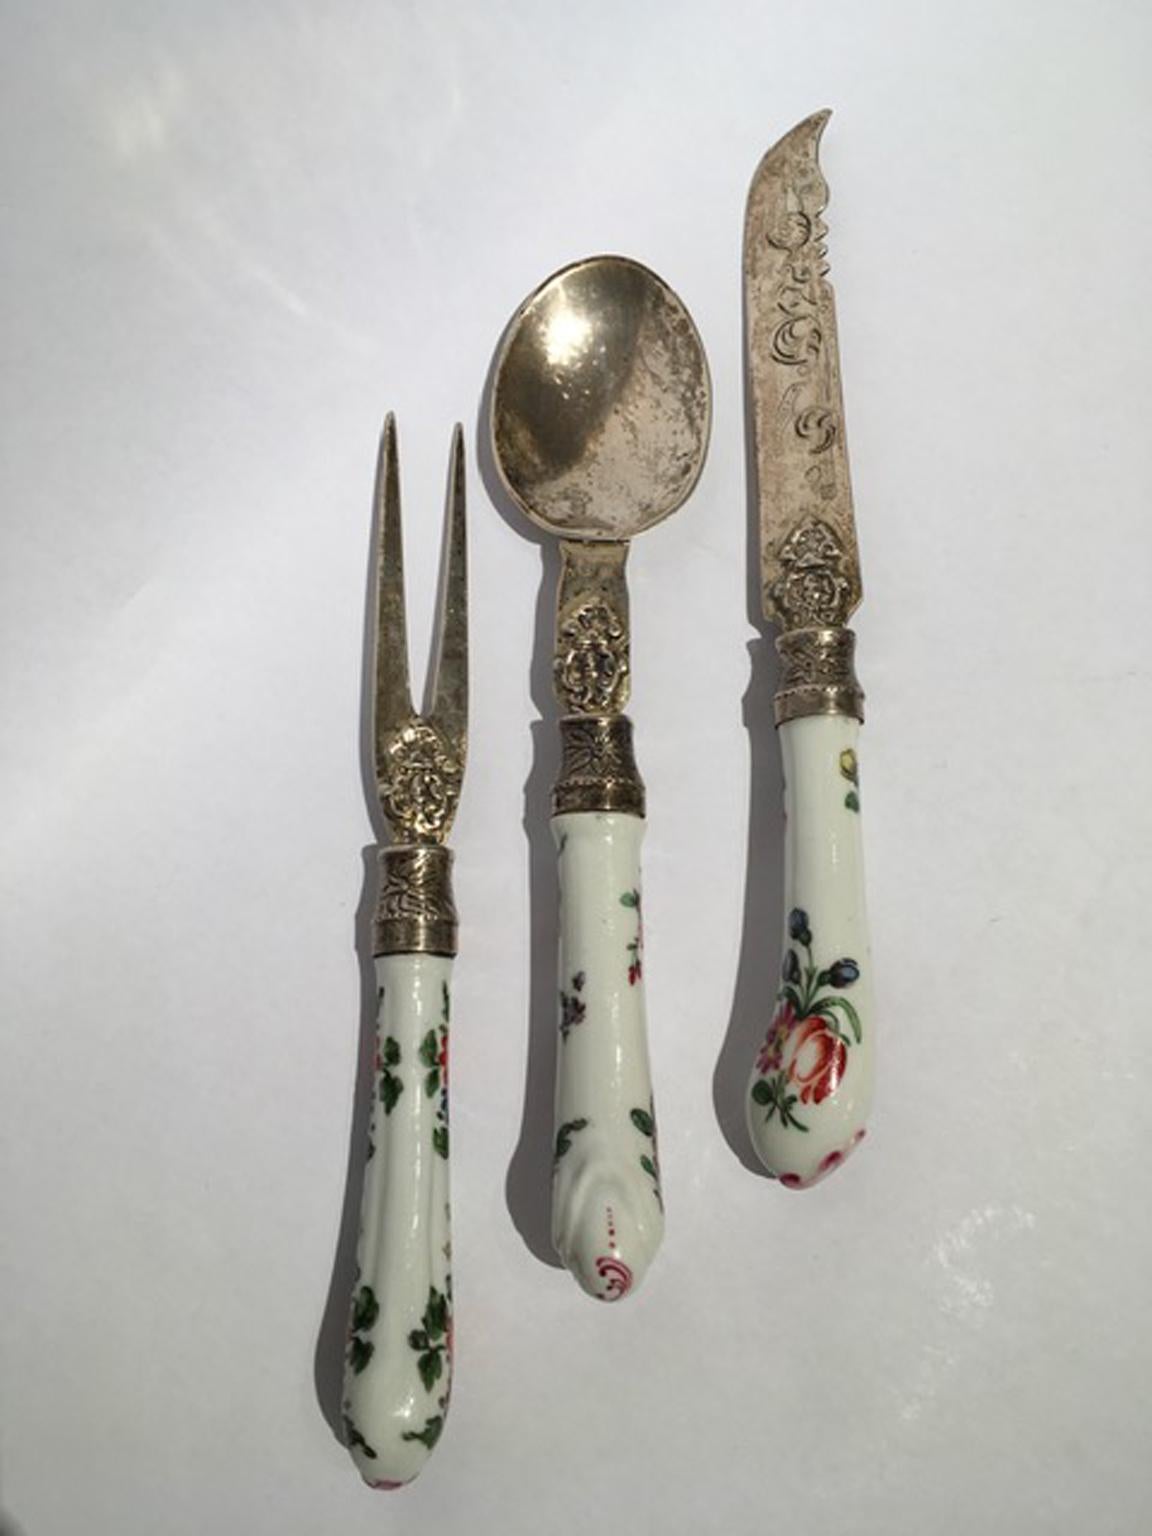 This set of three cutleries: fork, knive, spoon, are handmade in porcelain with the silver forged and decorated with flower drawings.
An handcrafted work, fine and very delicate, very unusual pieces and not easy to find.
Fully marked with Great